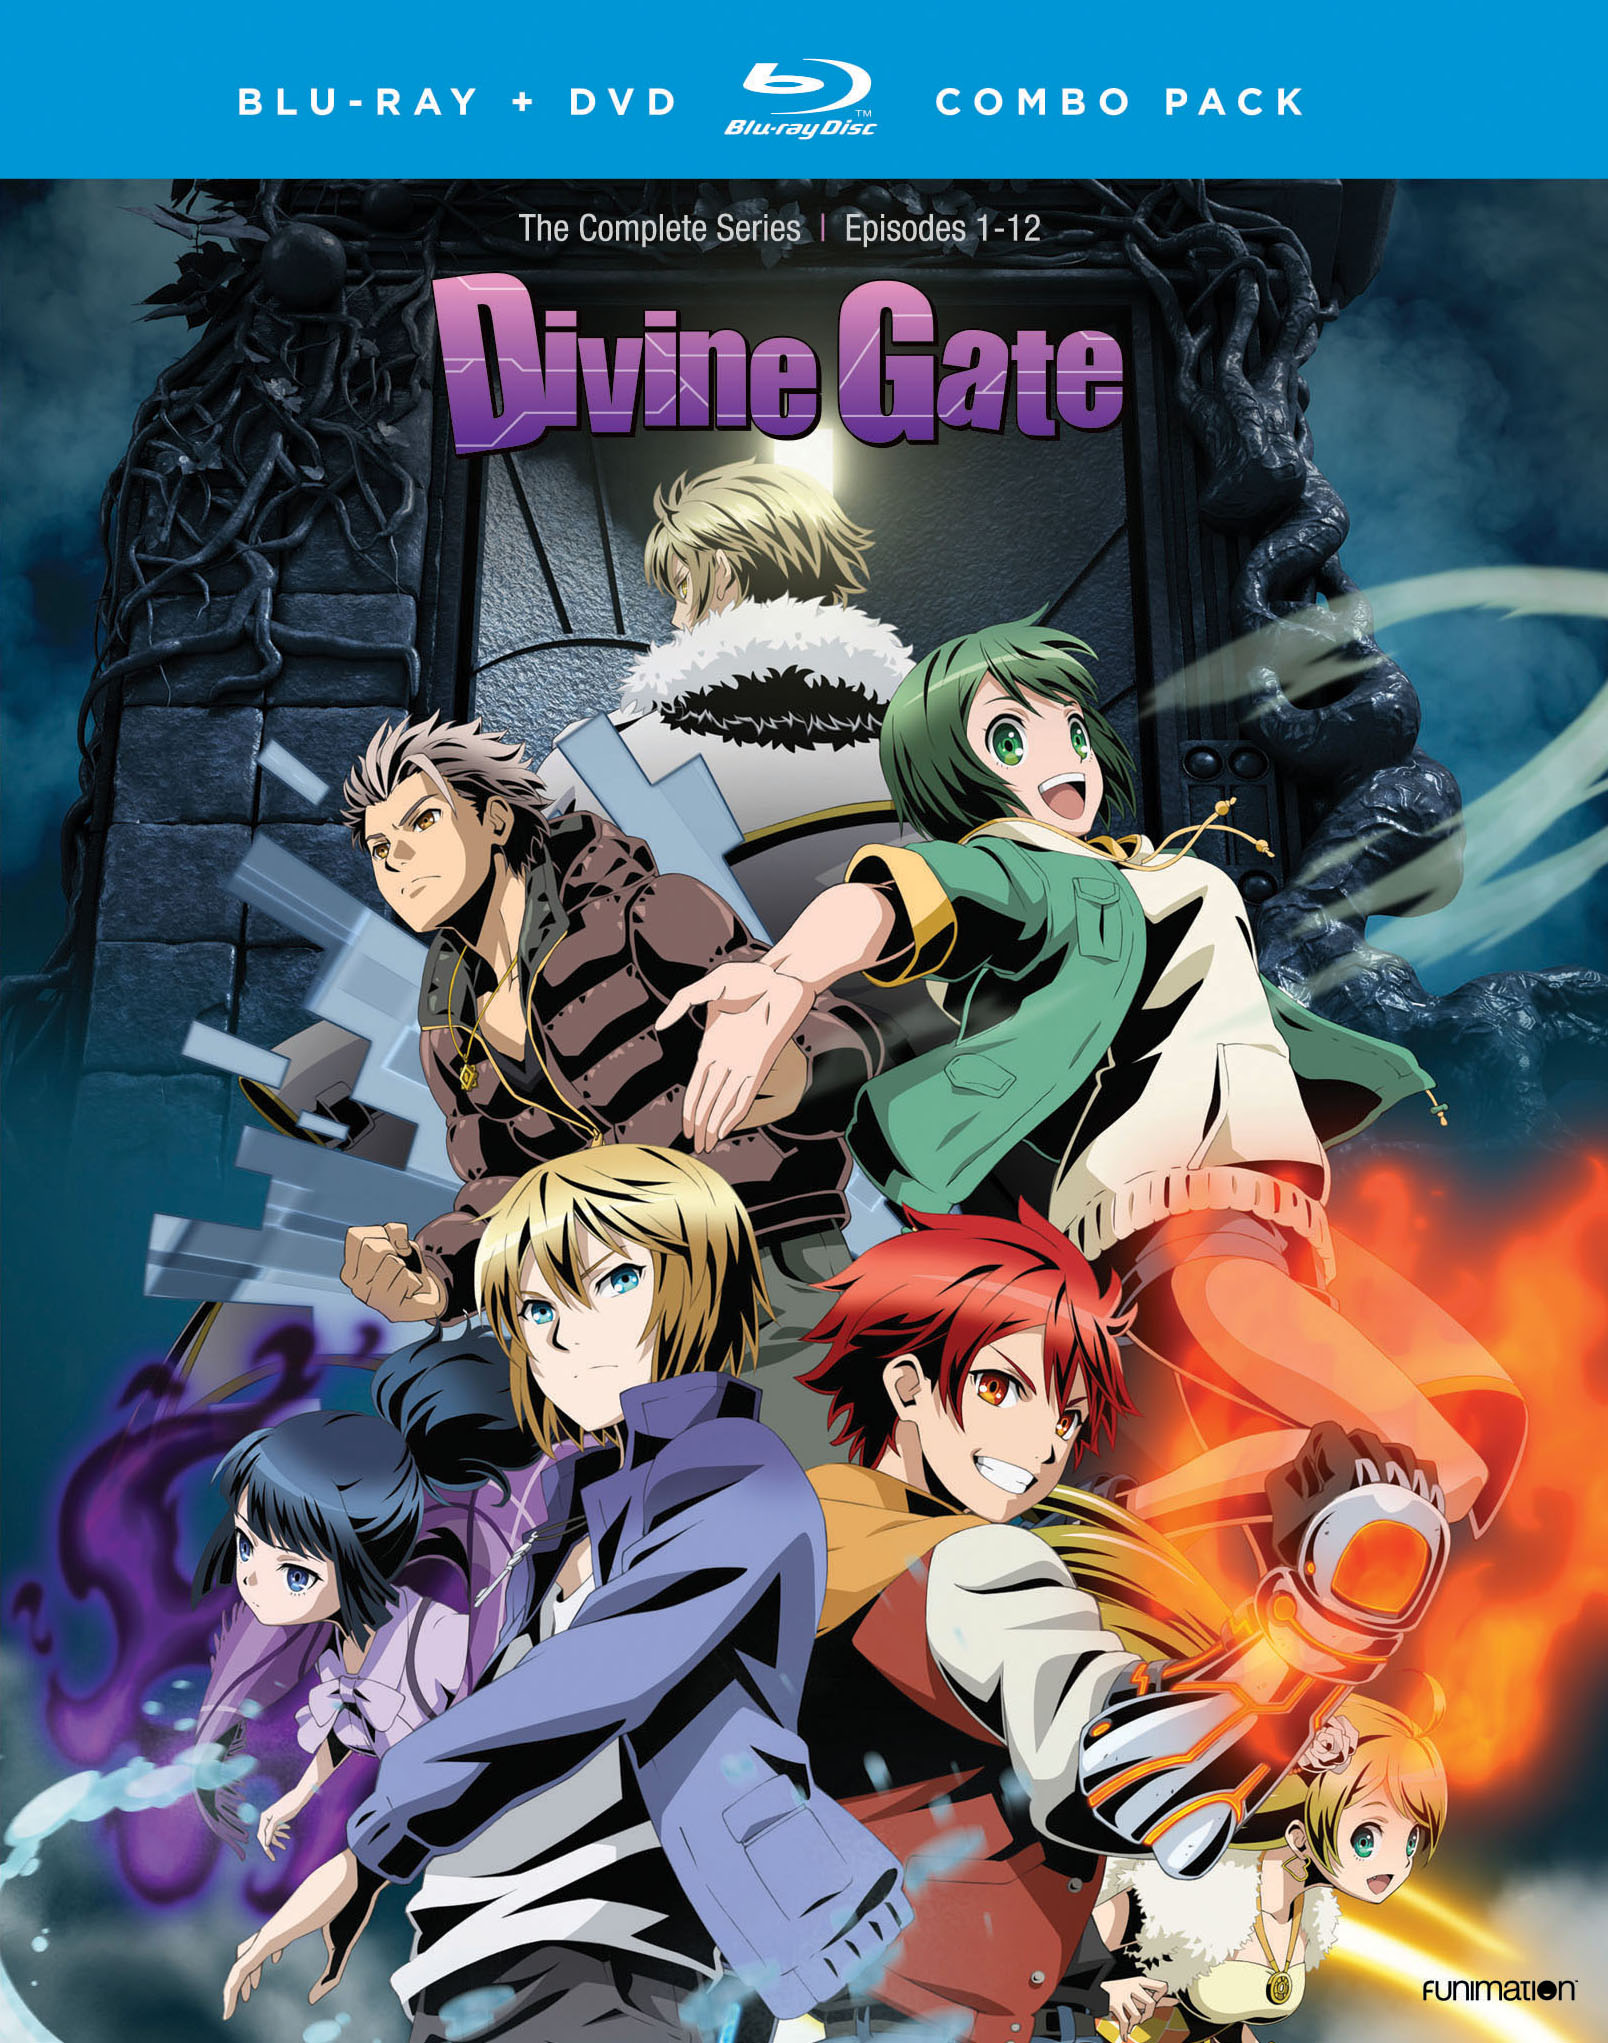 Divine Gate - The Complete Series - Blu-ray + DVD image count 0